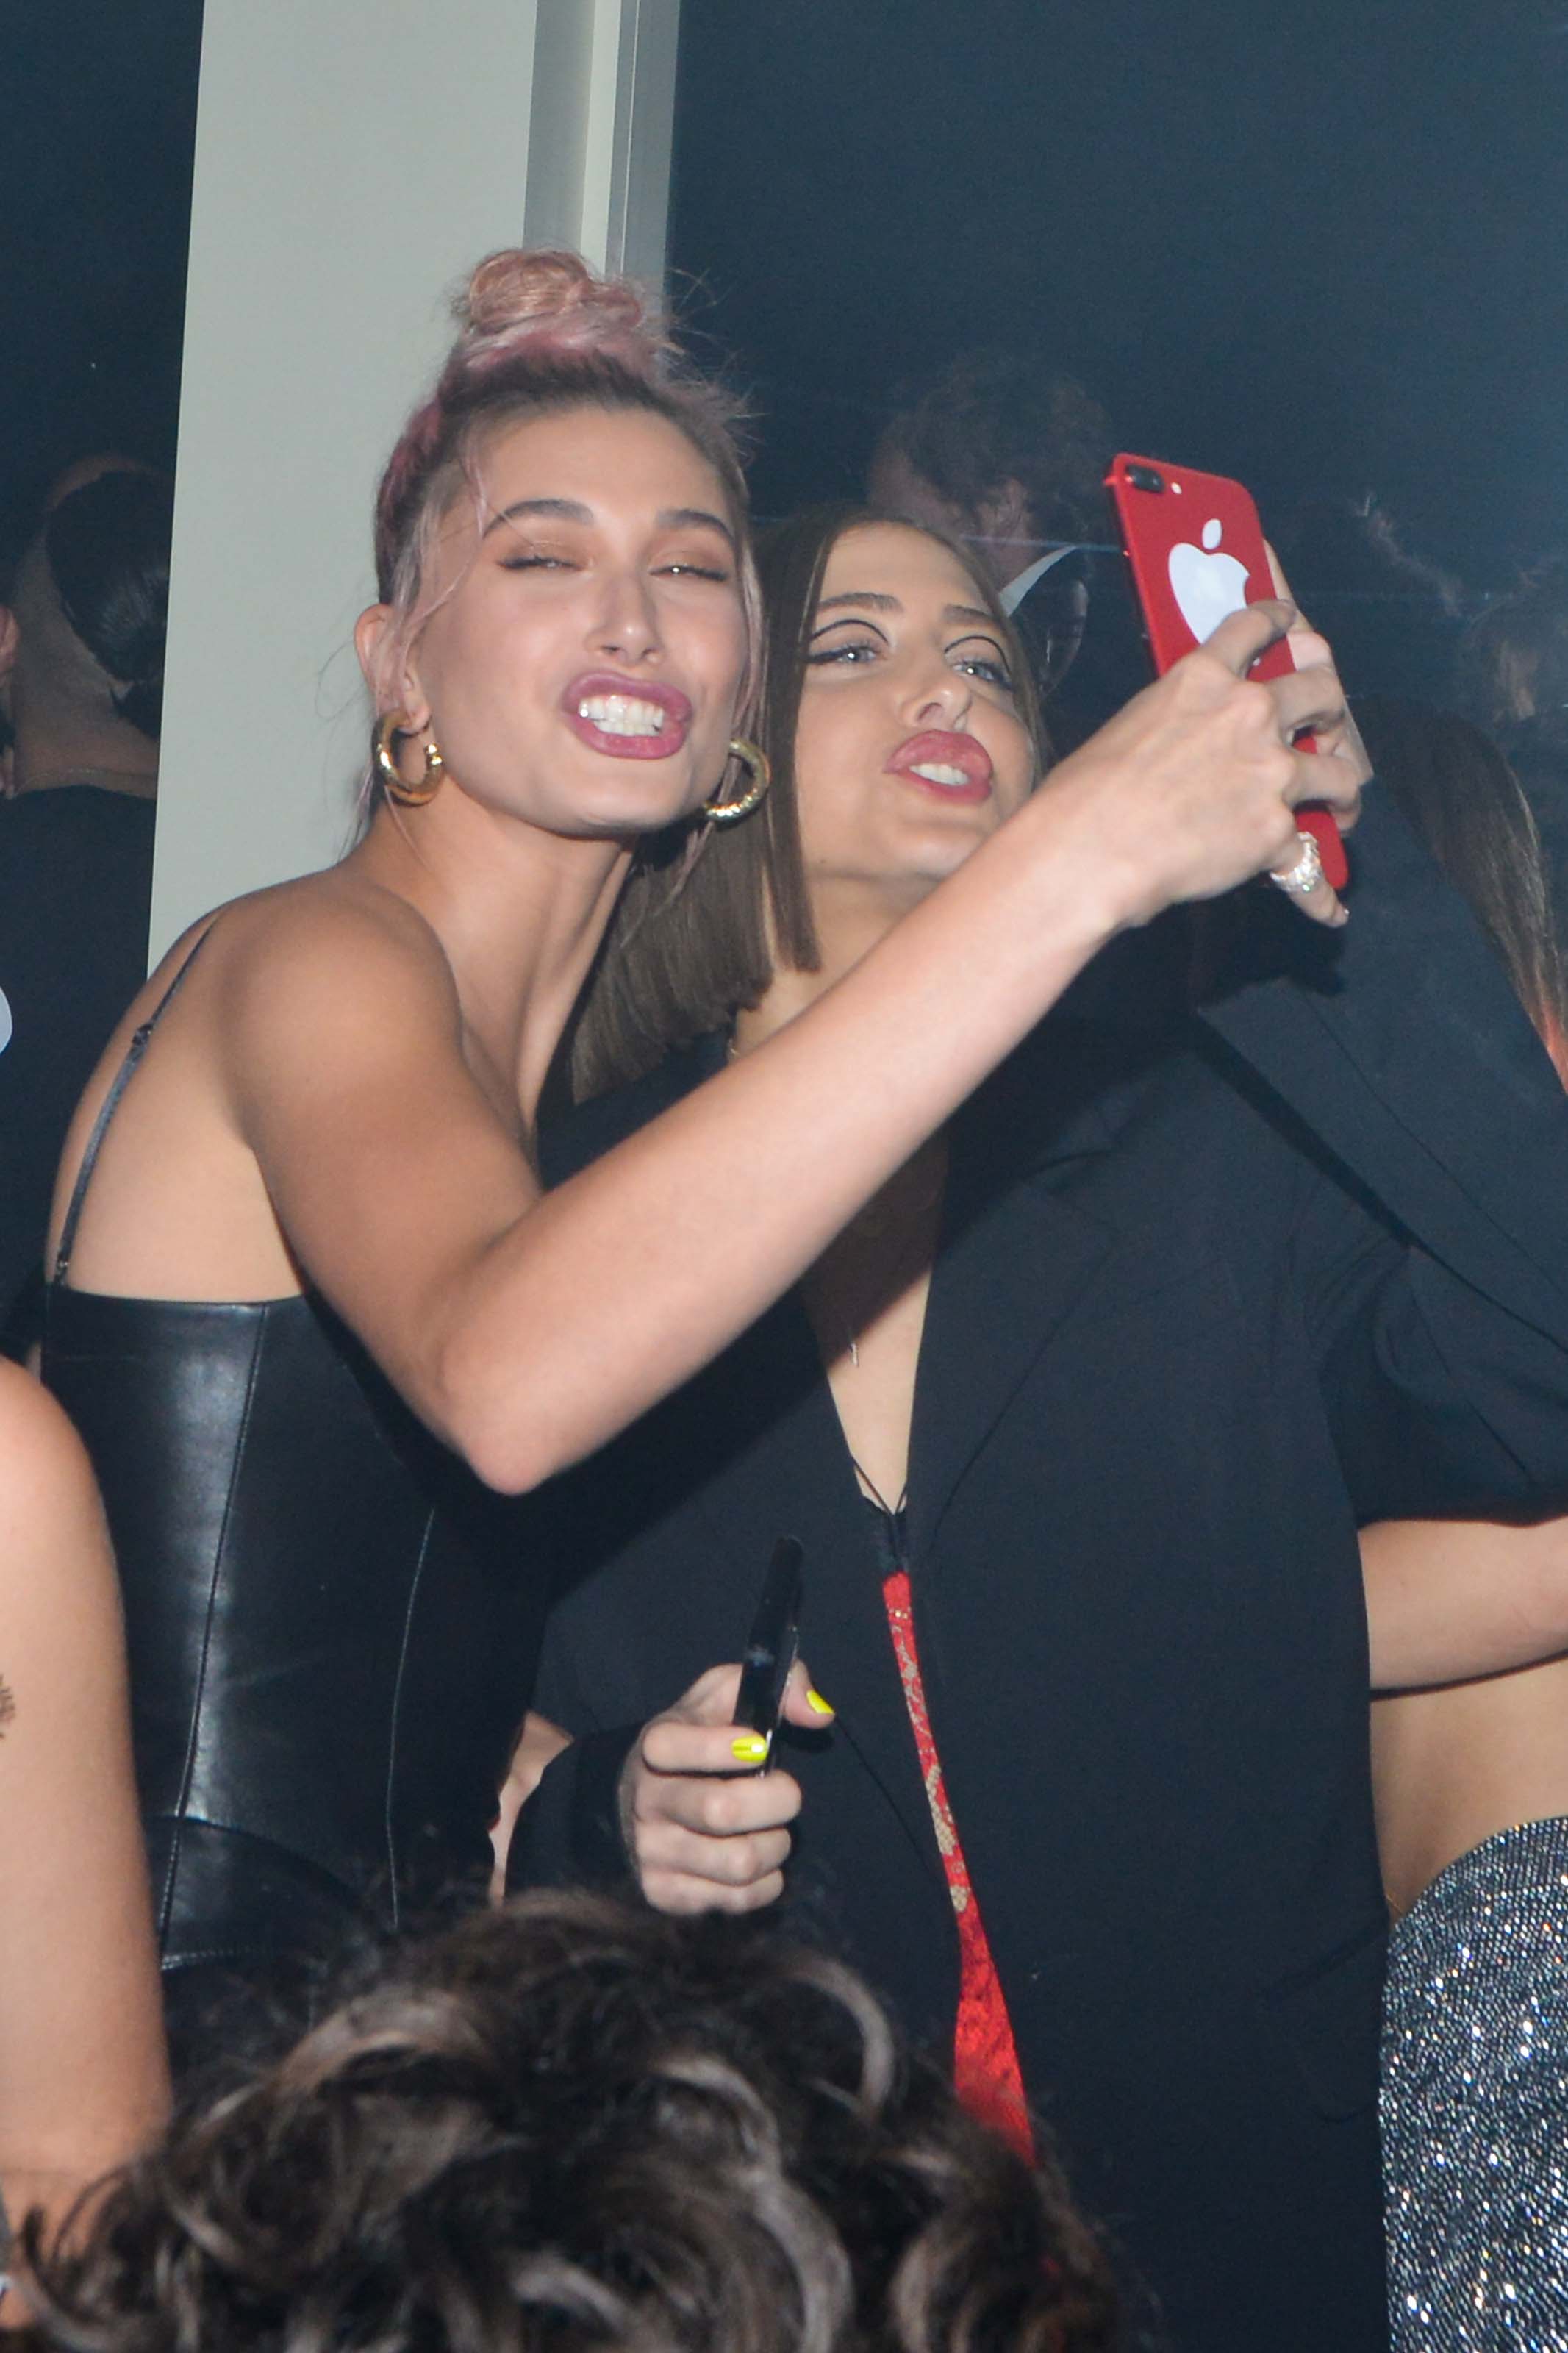 Hailey Baldwin attends Magnum Party